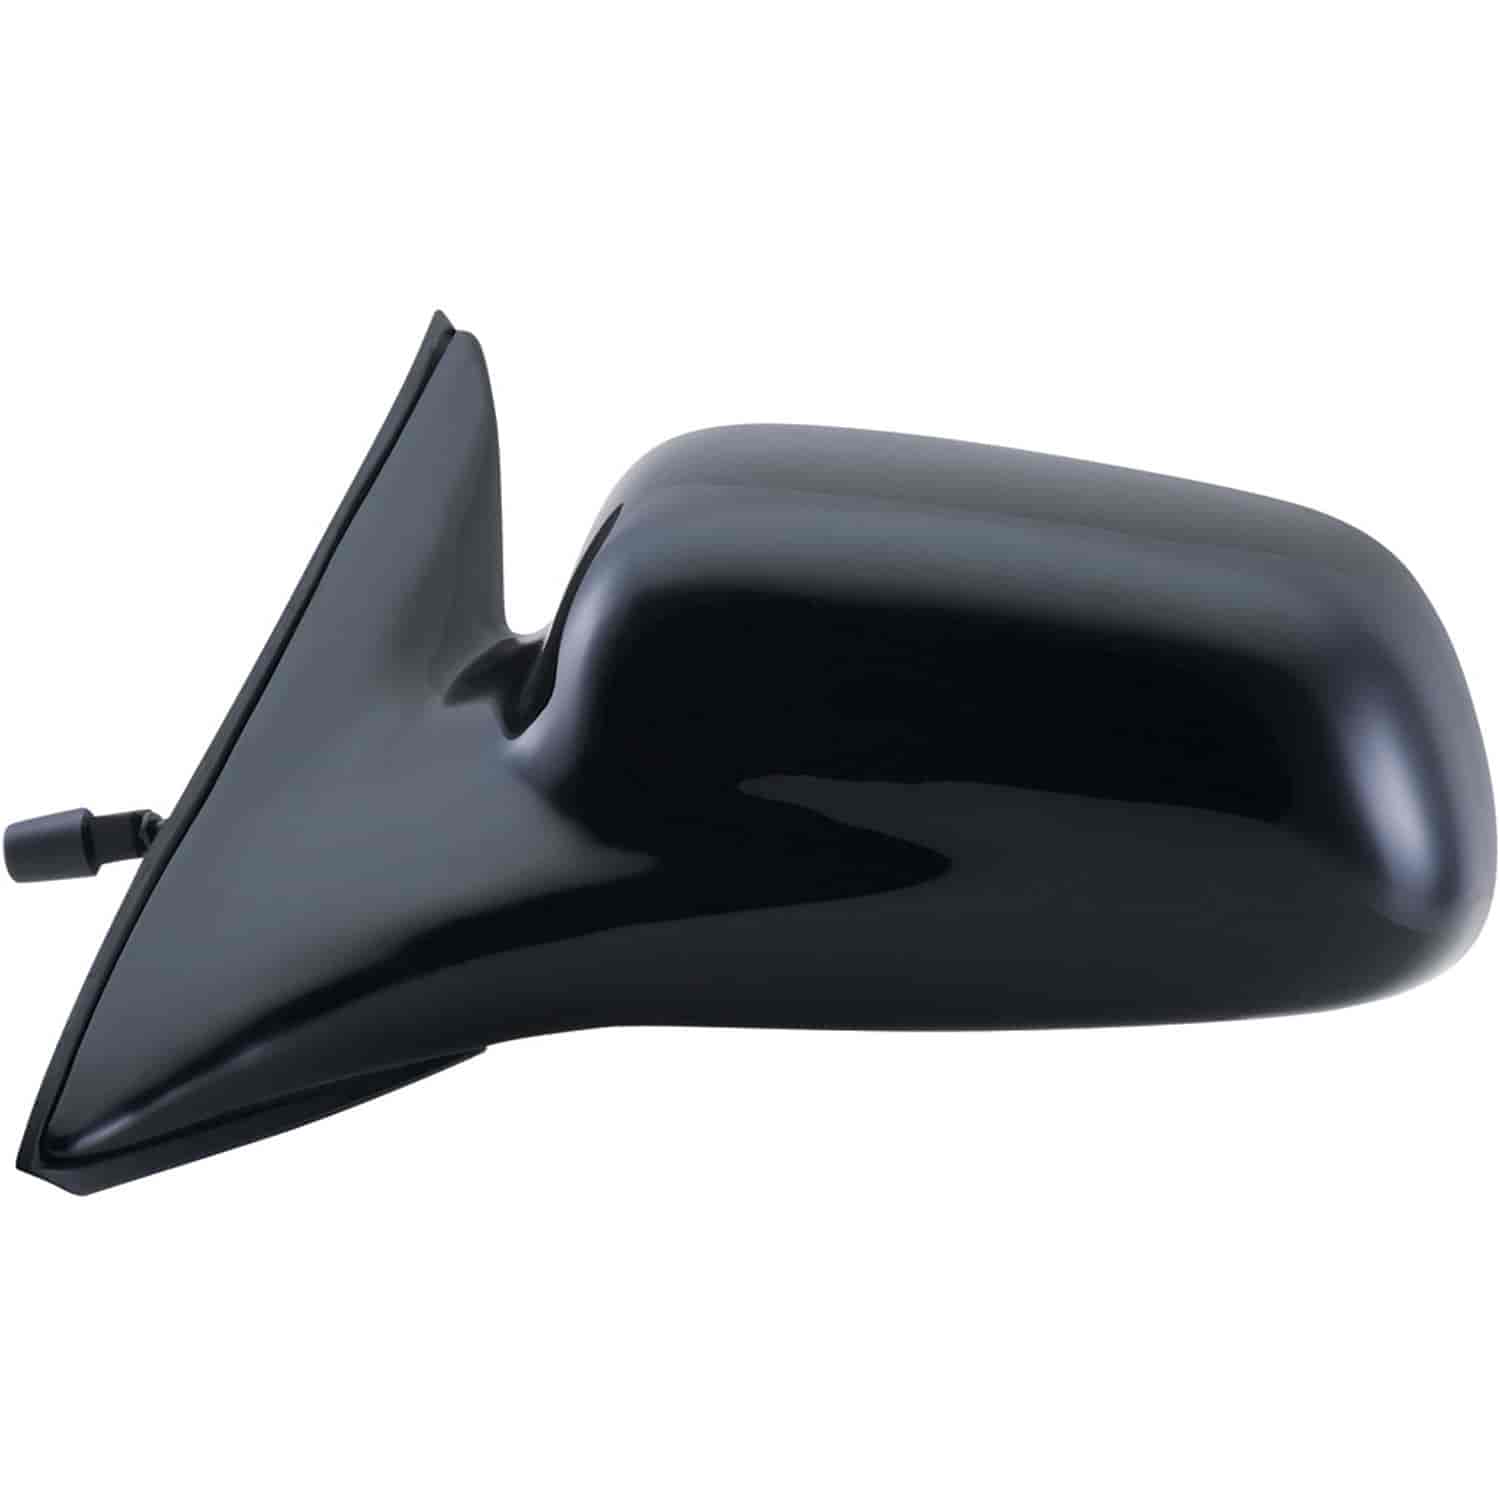 OEM Style Replacement mirror for 99-03 Mitsubishi Galant driver side mirror tested to fit and functi